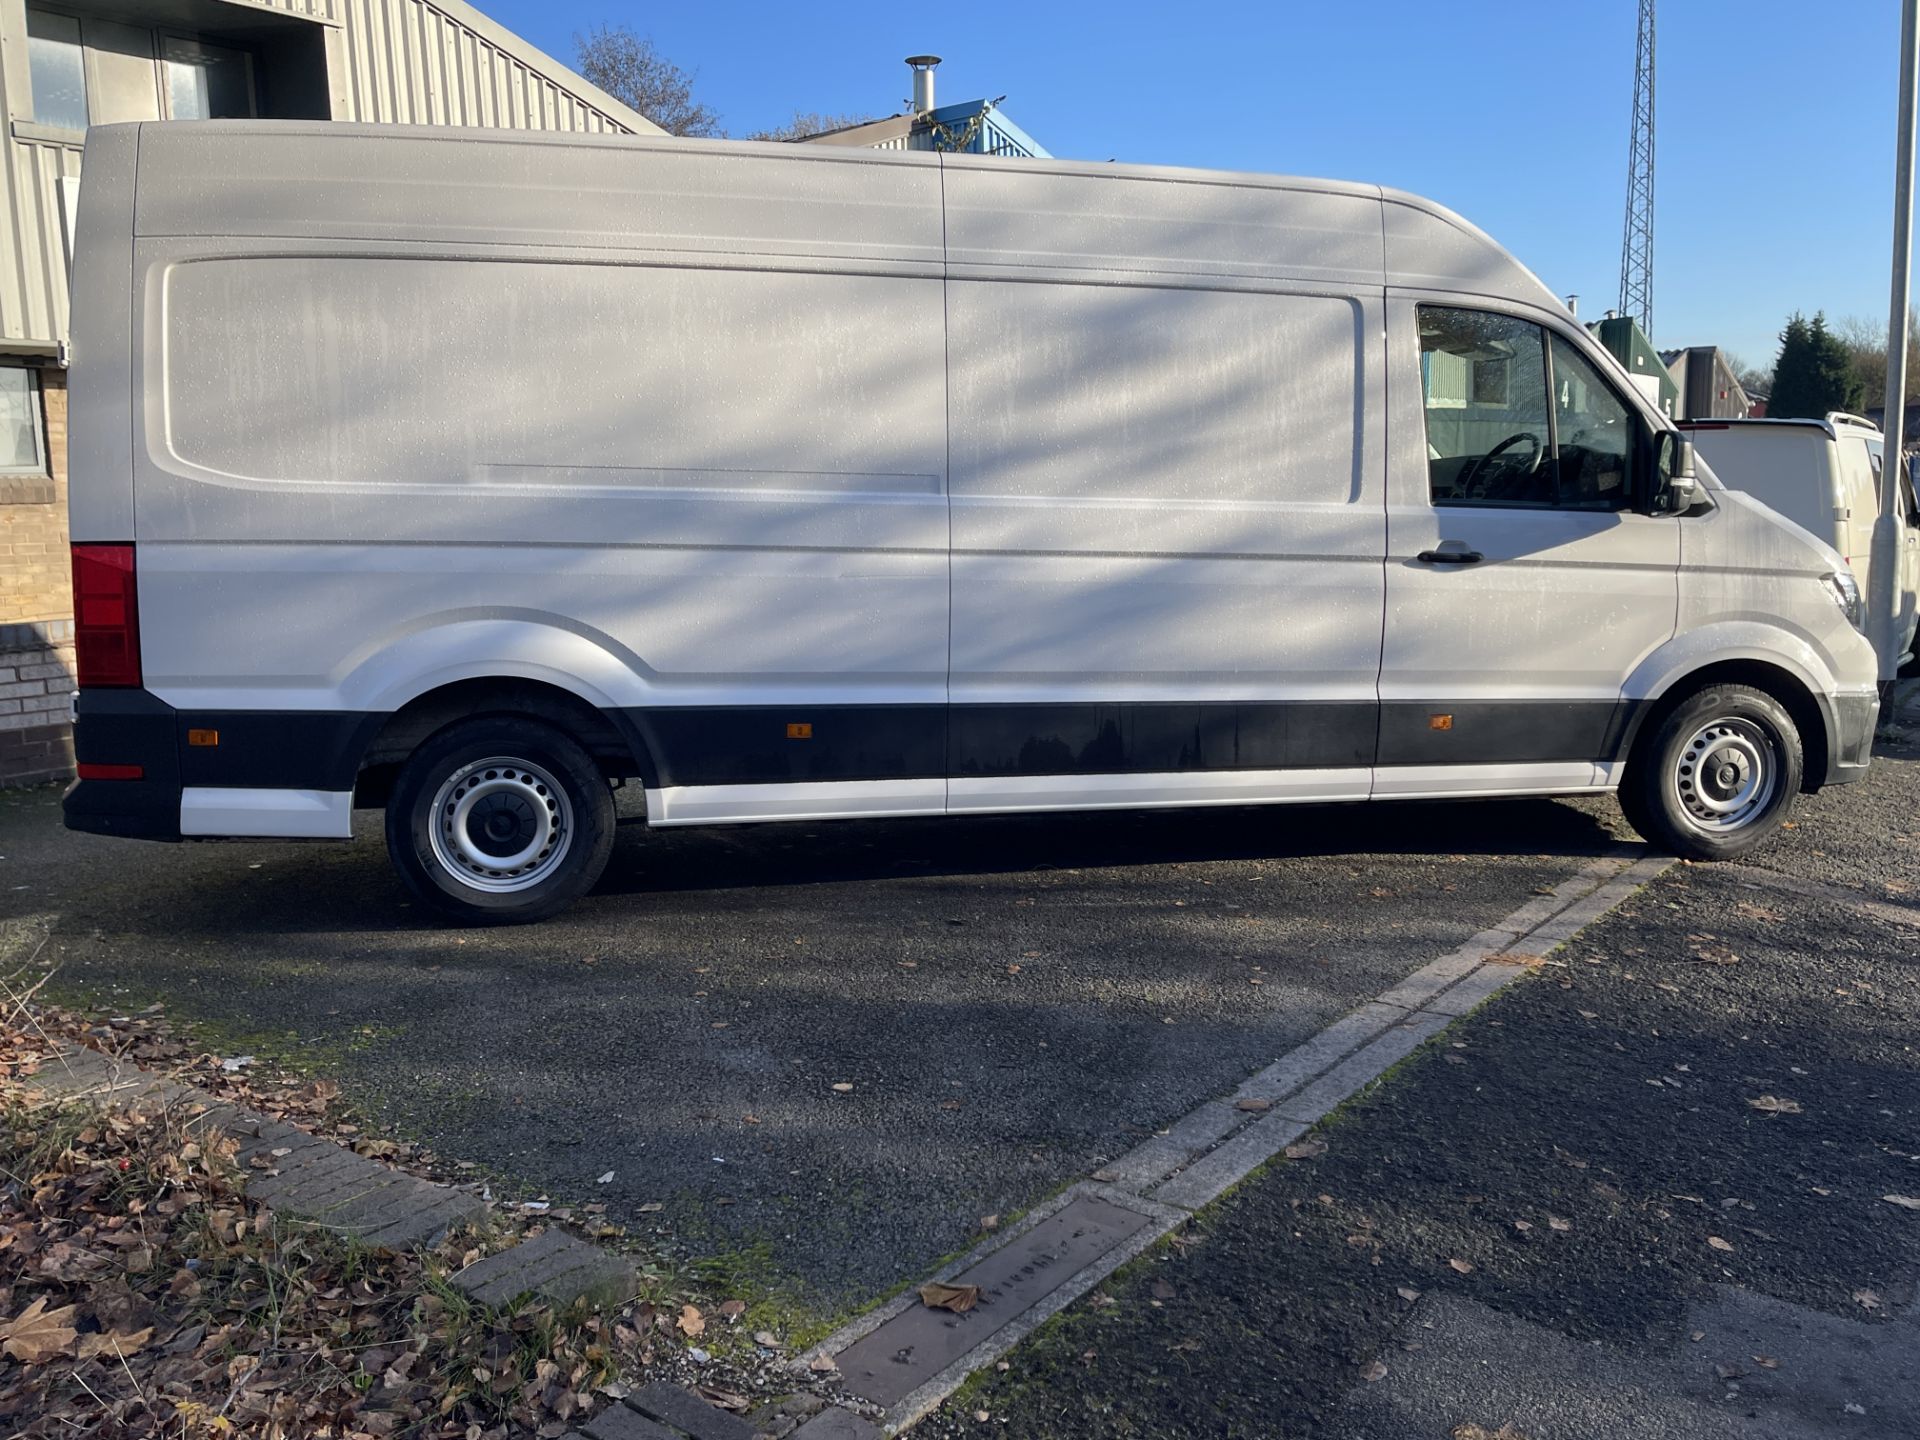 2018 - VW Crafter CR35 102PS Trend Line LWB TDI - Image 4 of 34